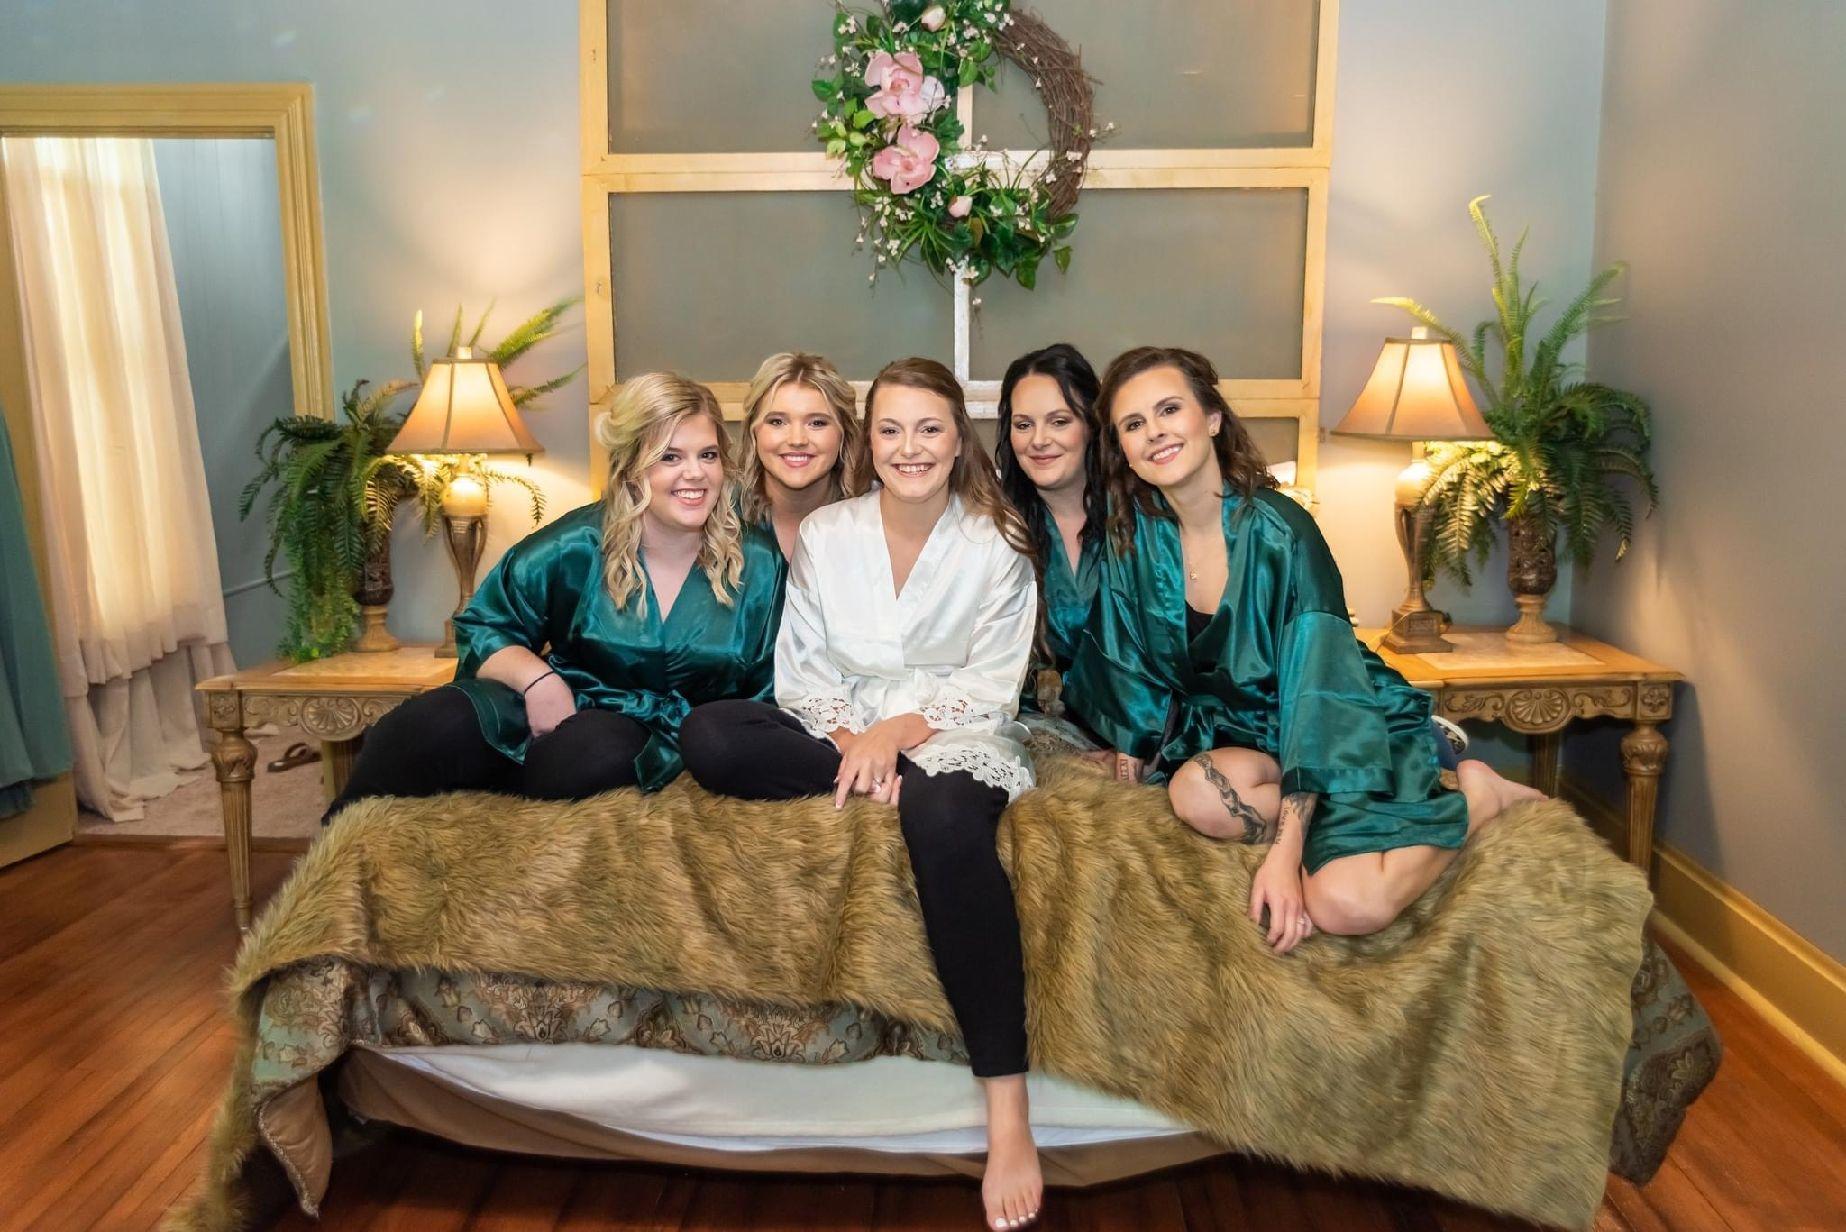 the bride and her bridesmaids in matching green wraps getting dressed in the historic Hayes House